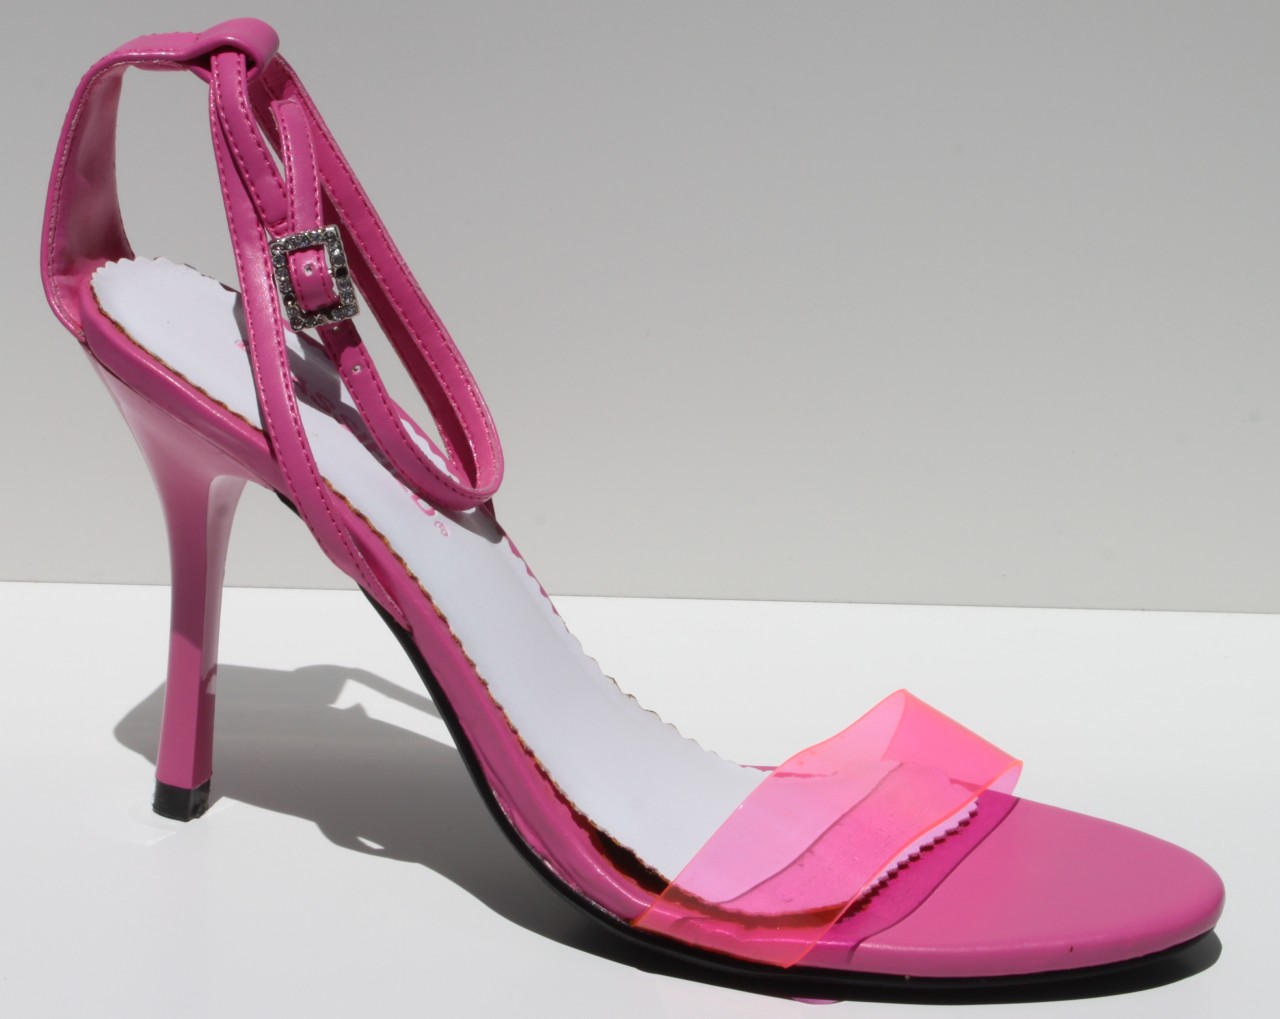 Classified Pink Slingback High Heel Sandals Womens Shoes (Reatail $50)